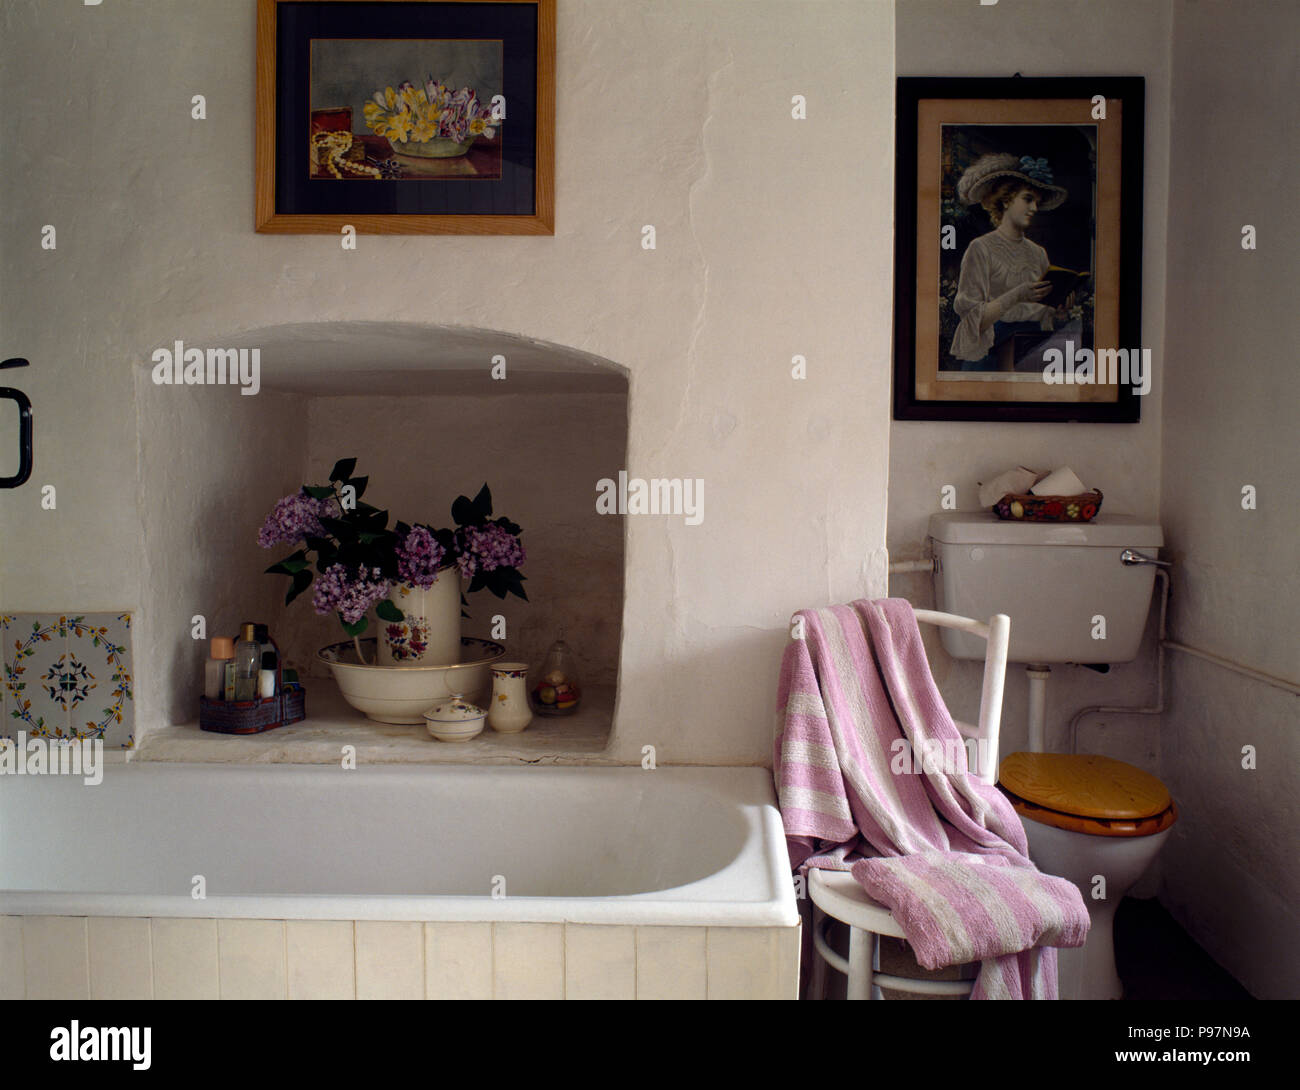 Jug of flowers in alcove above bath in a cottage bathroom Stock Photo